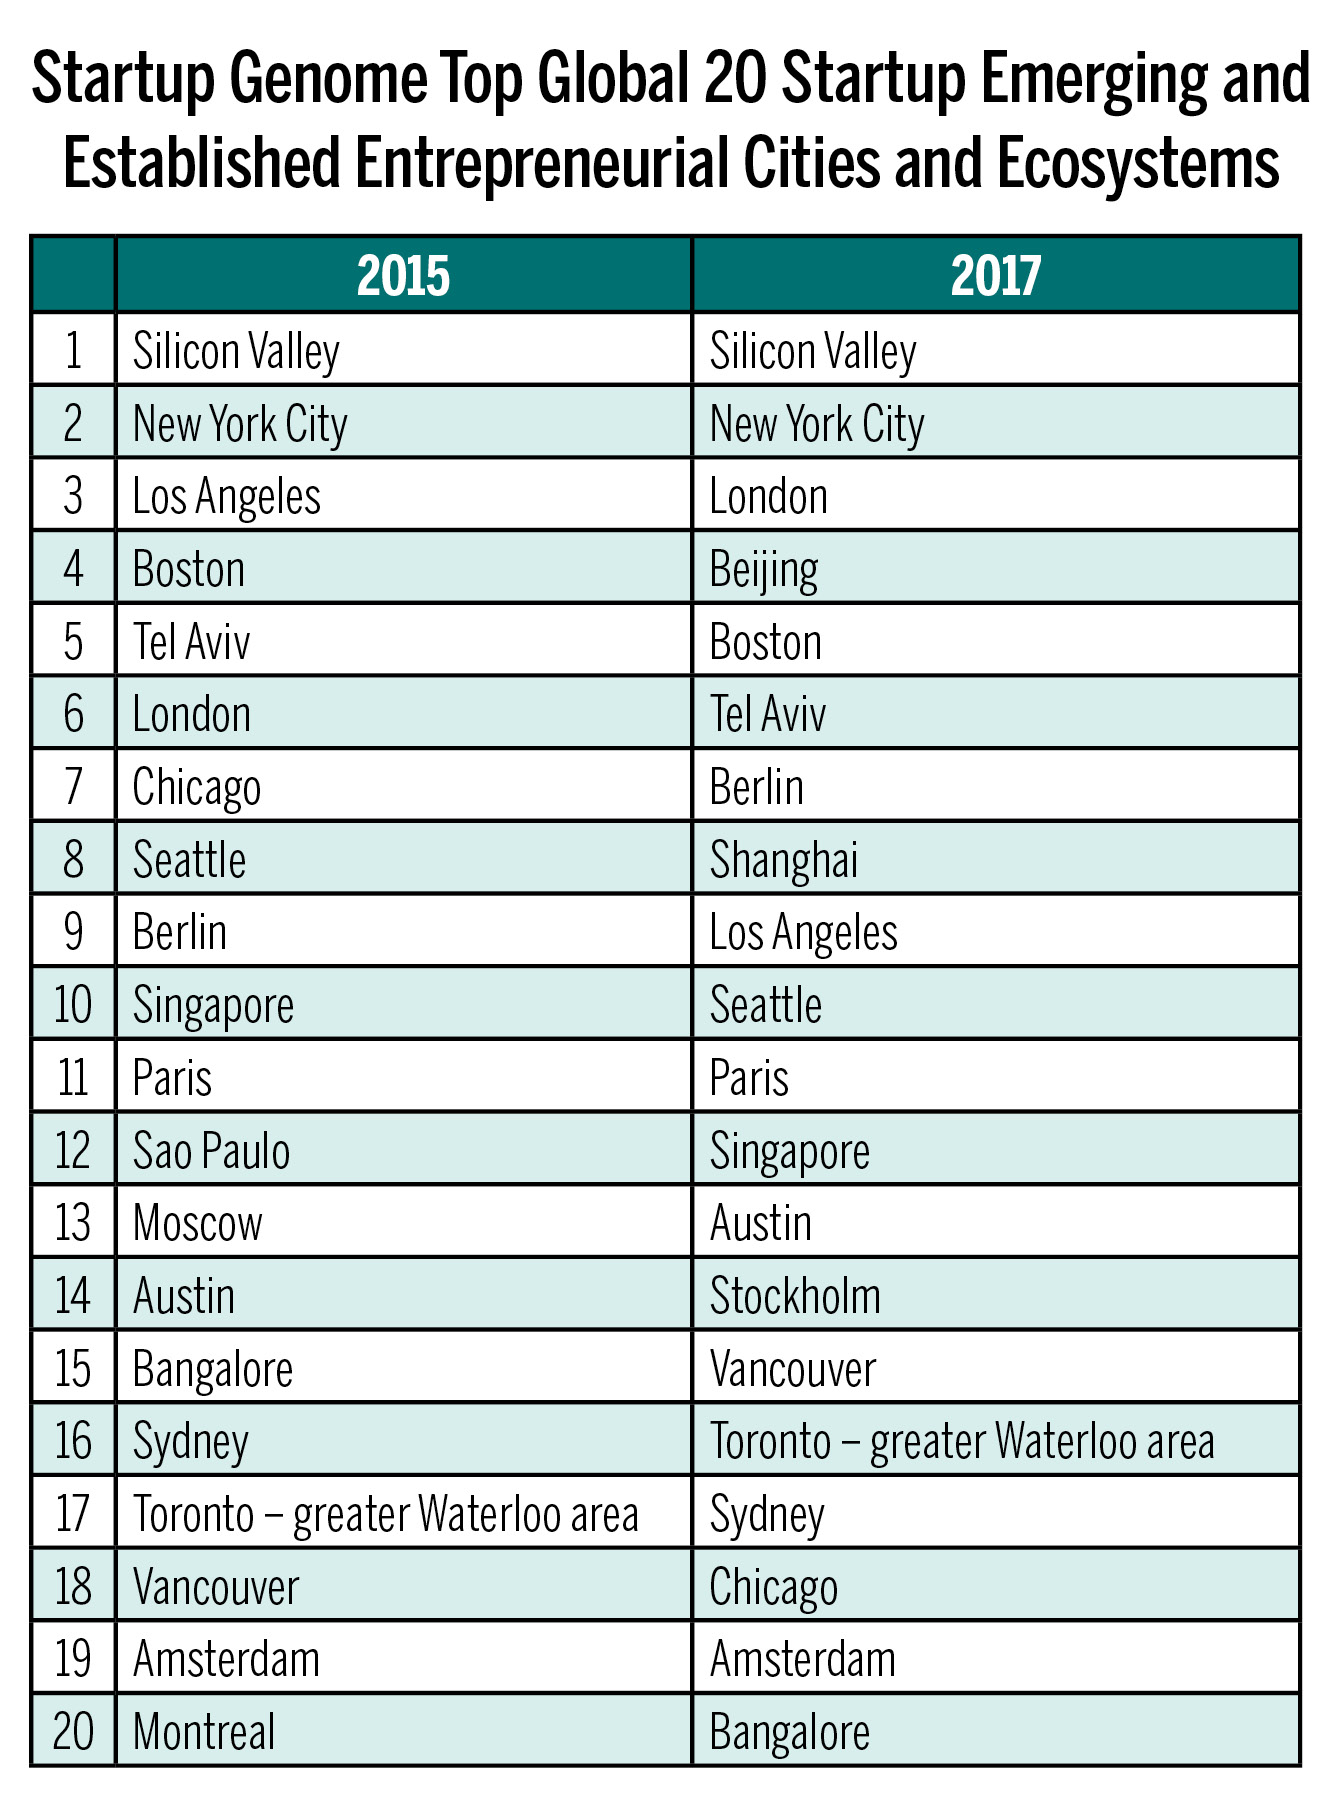 This chart portrays the top 20 startup emerging and established entrepreneurial cities and ecosystems in 2015 and also in 2017. The changes in status are repeated below this image in the text.